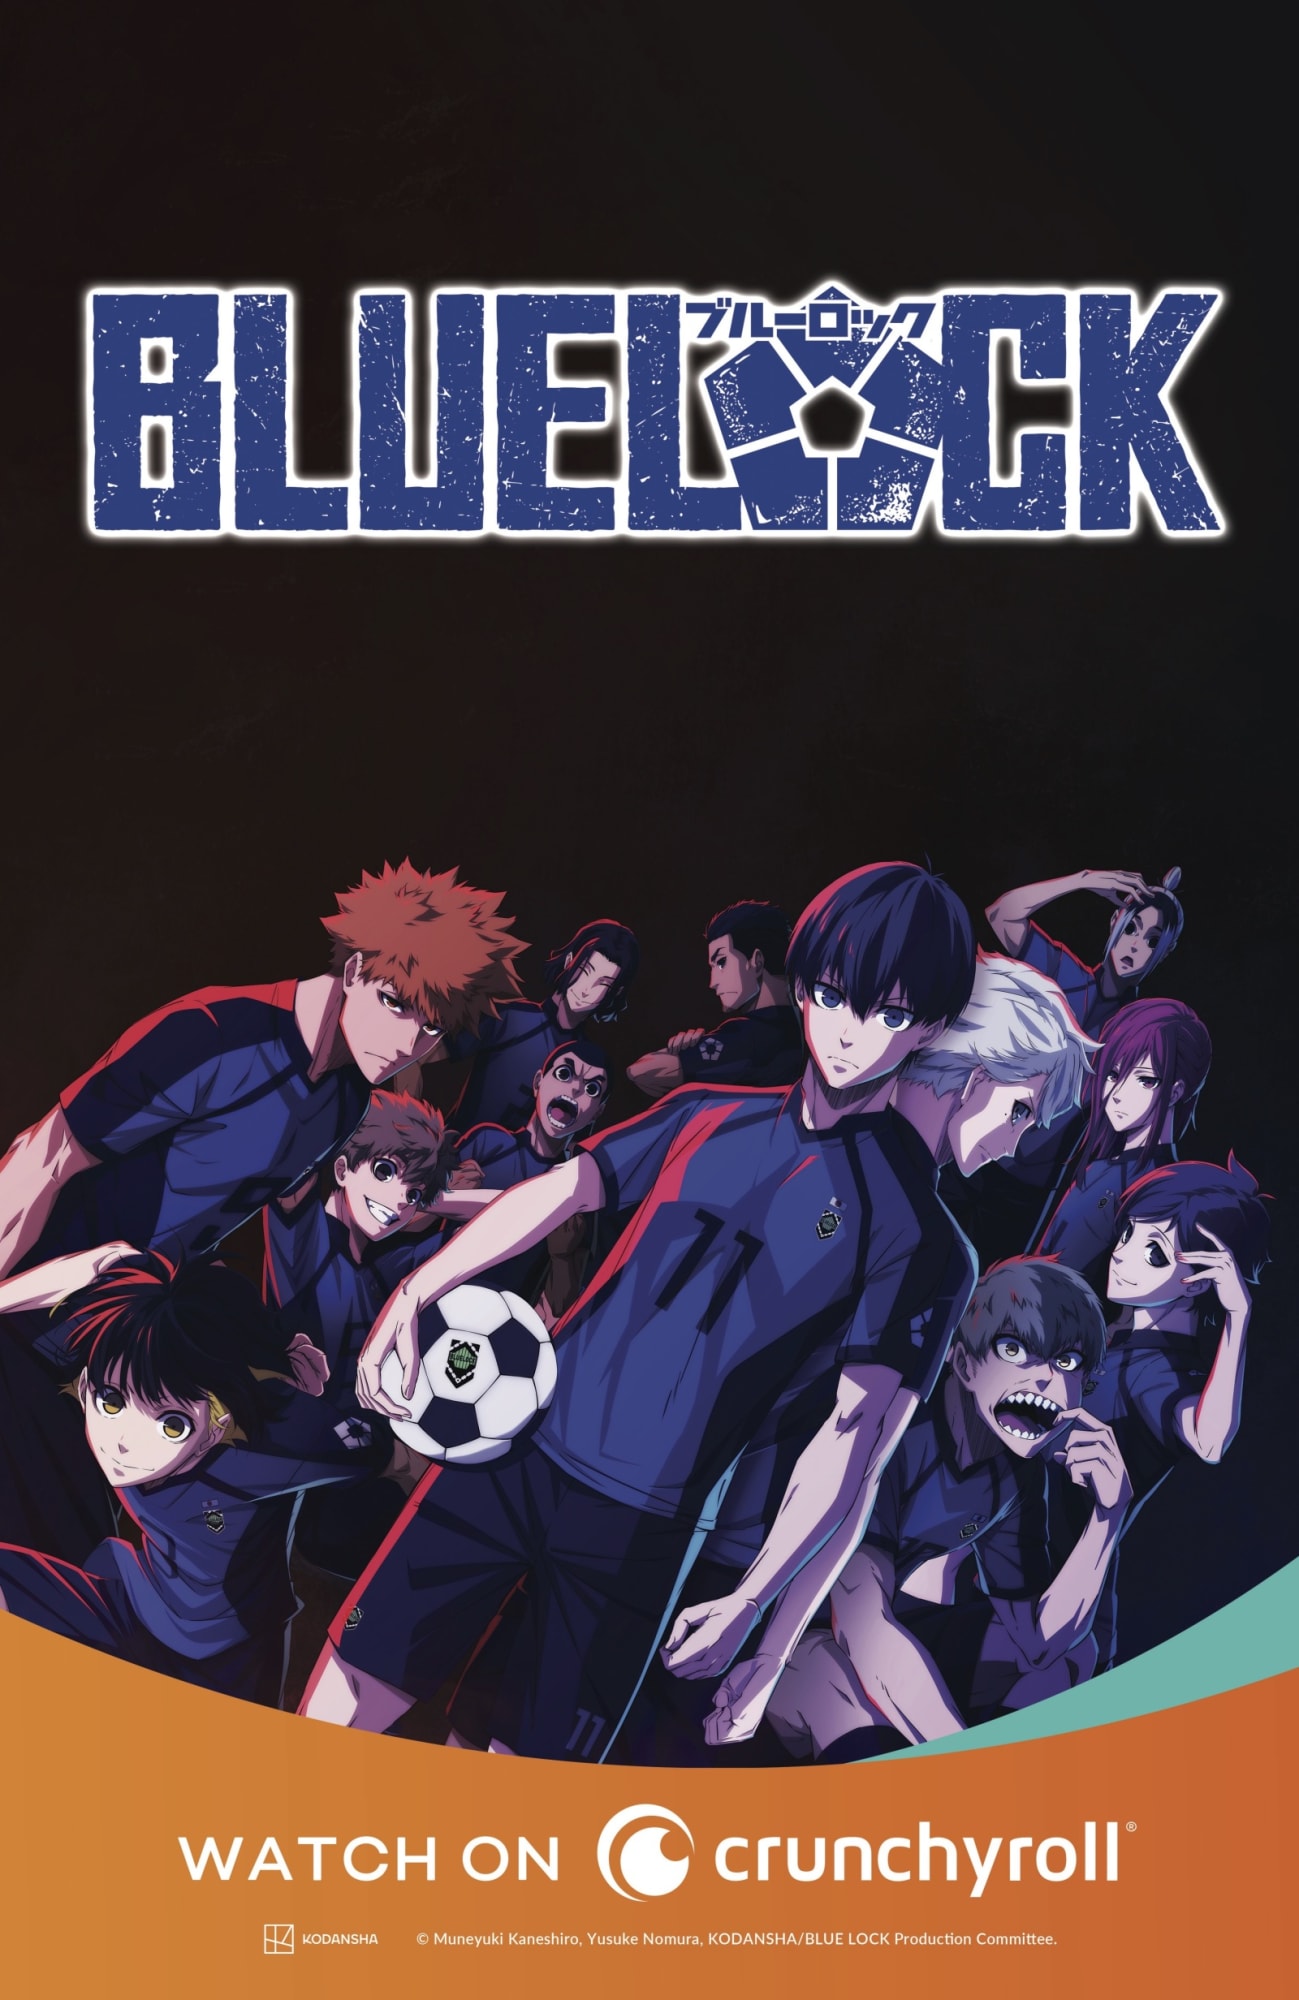 Crunchyroll set to hold real-life Blue Lock tournament in Dallas, Texas  this weekend